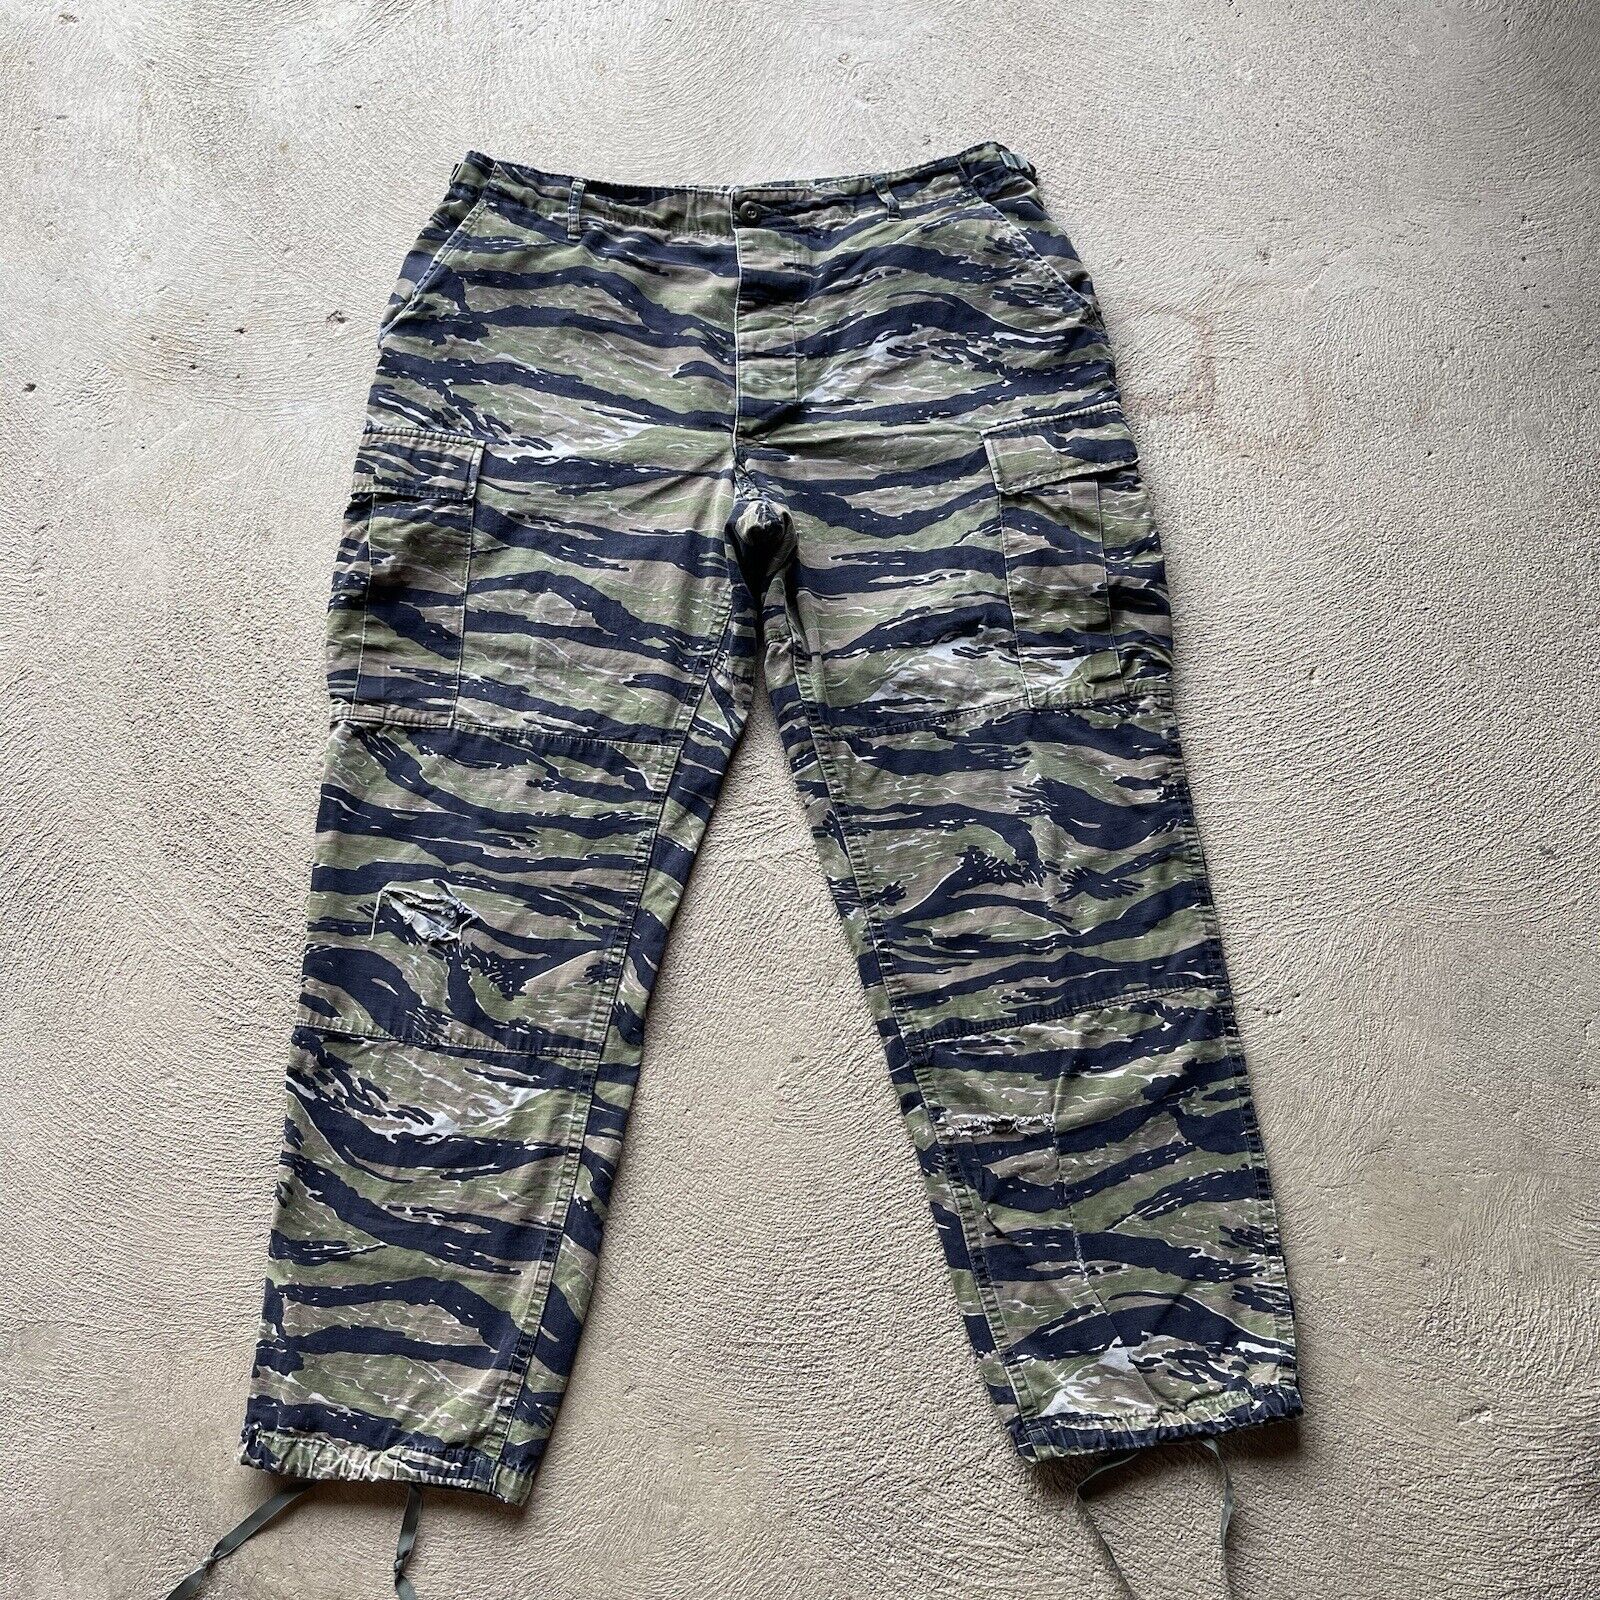 Military Pants Large Regular Tiger Stripe Camo Cargo Combat Trousers Army Baggy